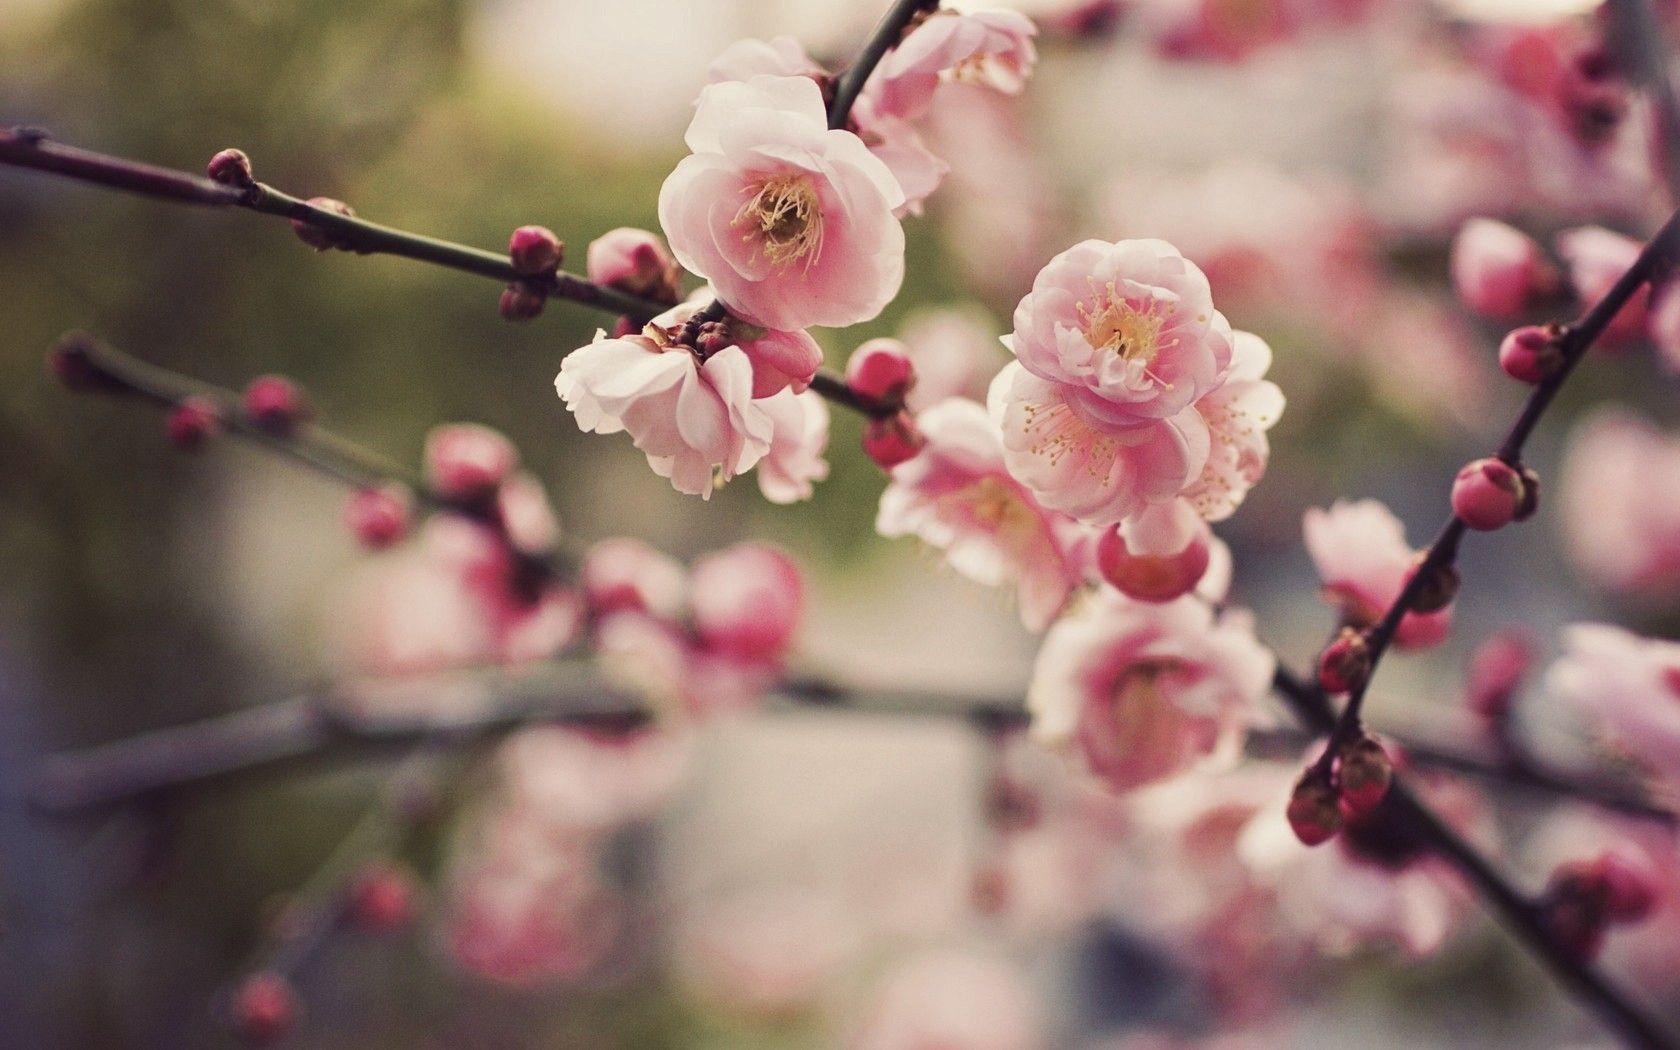 Pretty Cherry Blossom Wallpapers 45336 1680x1050 px ~ HDWallSource